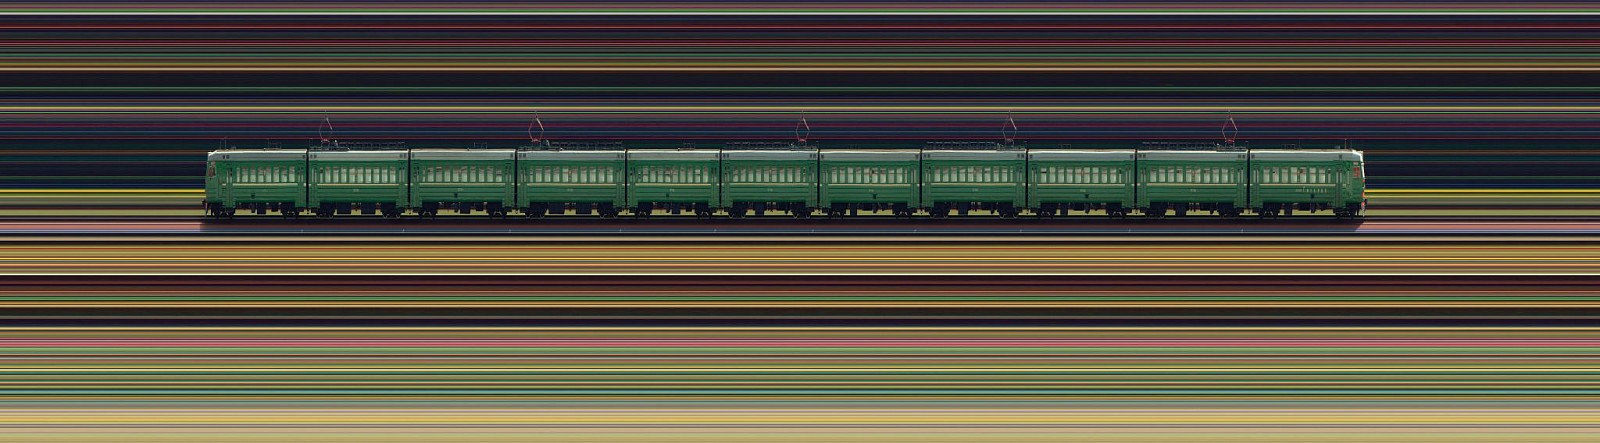 Jay Mark Johnson, LOCAL TRAIN #1, 2008 Moscow RU
archival pigment on paper, mounted on aluminum, 40 x 144 in. (101.6 x 365.8 cm)